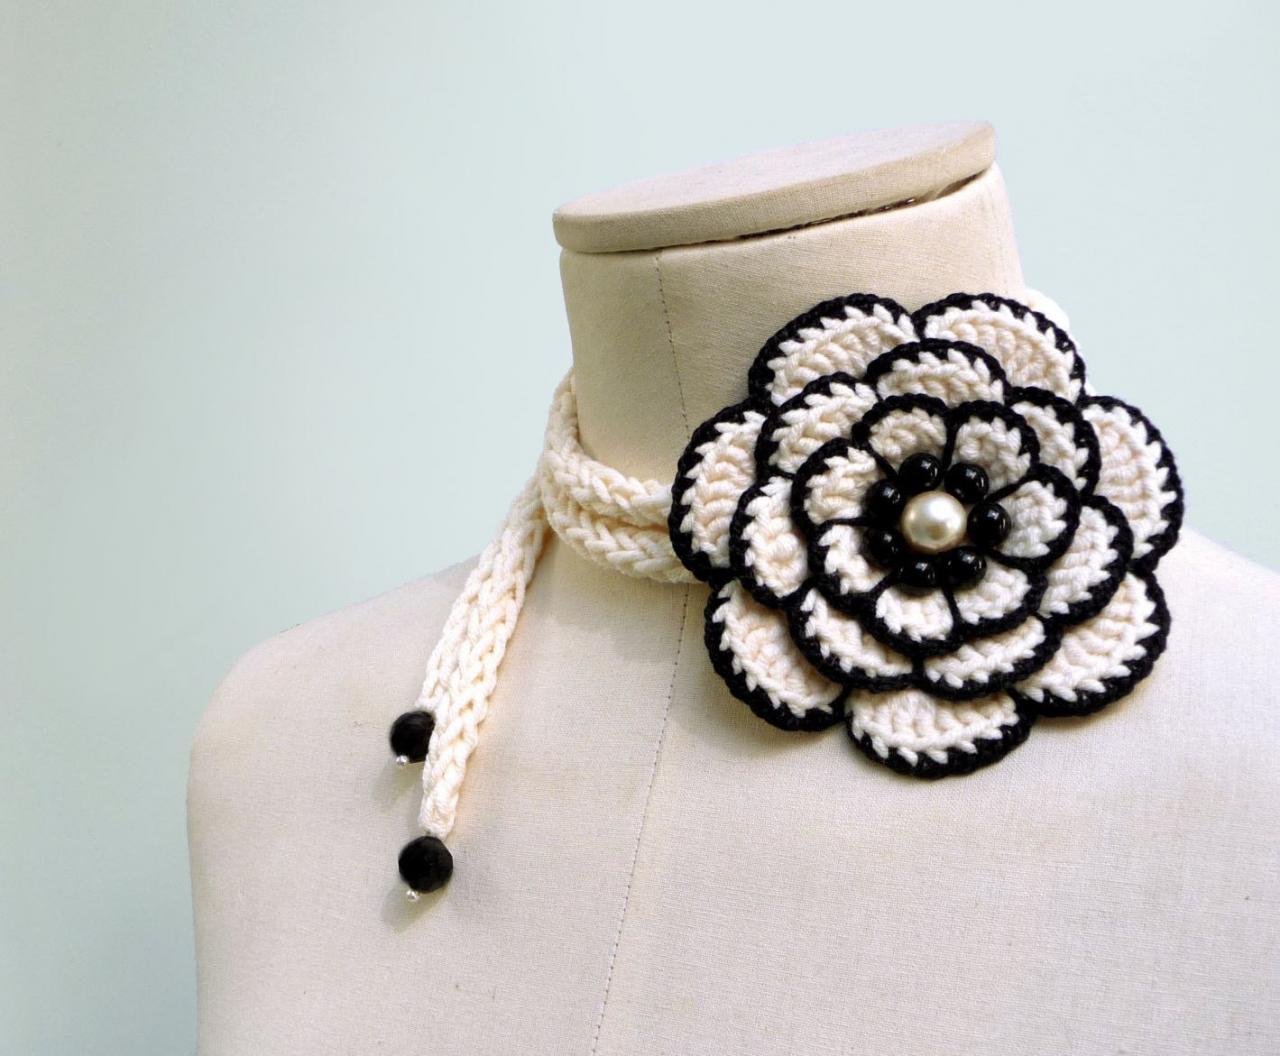 Crochet Lariat Necklace With Big Flower, Black And White Cotton With Pearls - Full Bloom